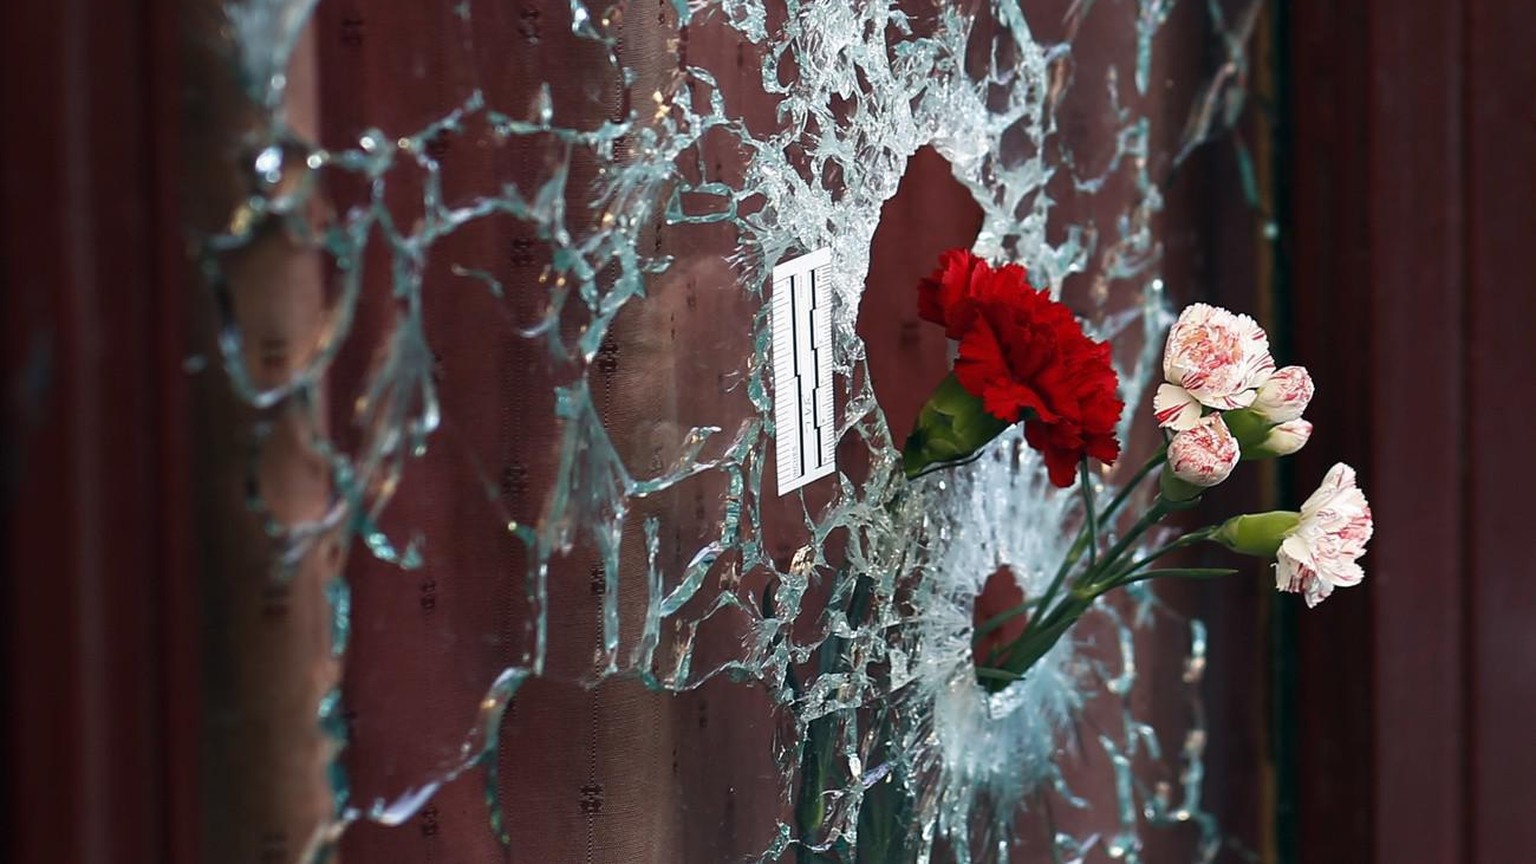 Flowers are set in a window shattered by a bullet at the Carillon cafe in Paris, France, Sunday Nov. 15, 2015, two days after over 120 people were killed in a series of shooting and explosions. French ...